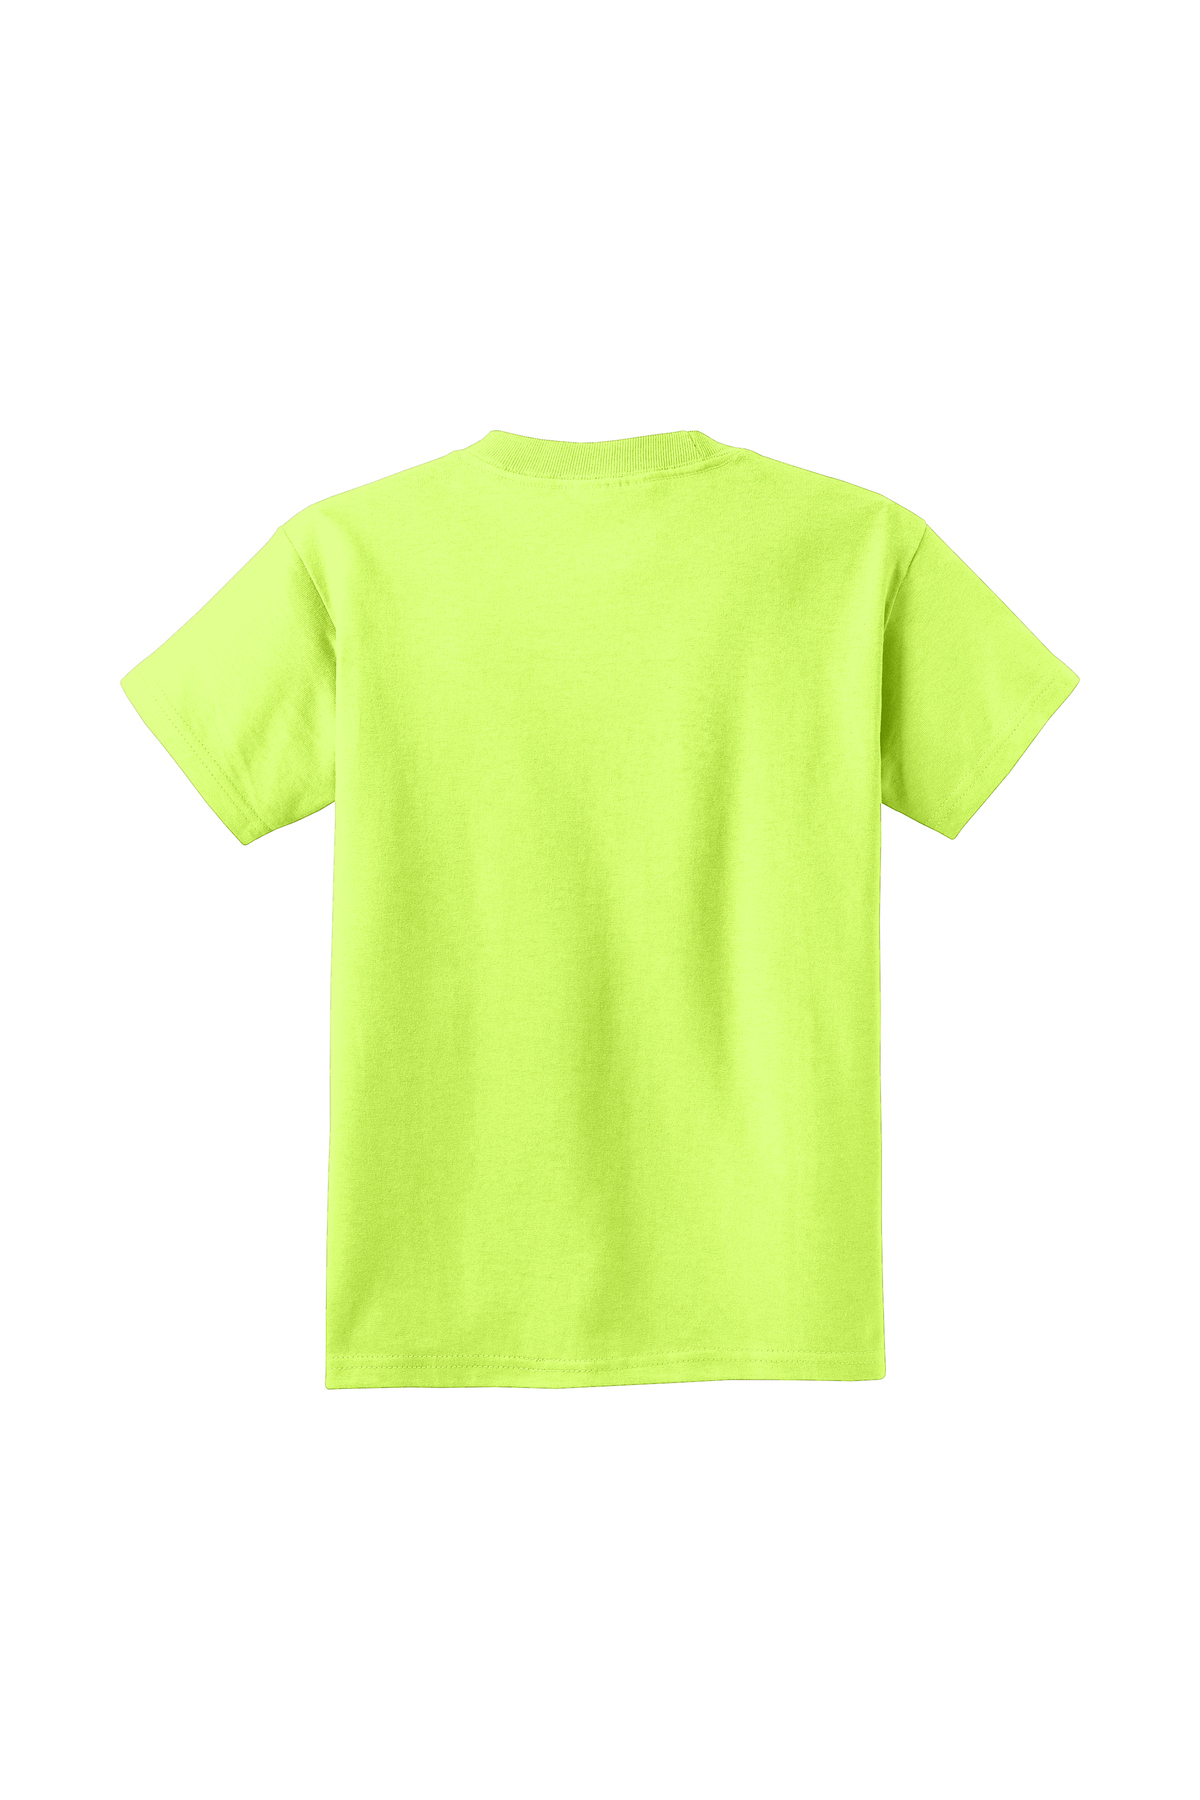 Port & Company Youth Core Cotton Tee | Product | SanMar